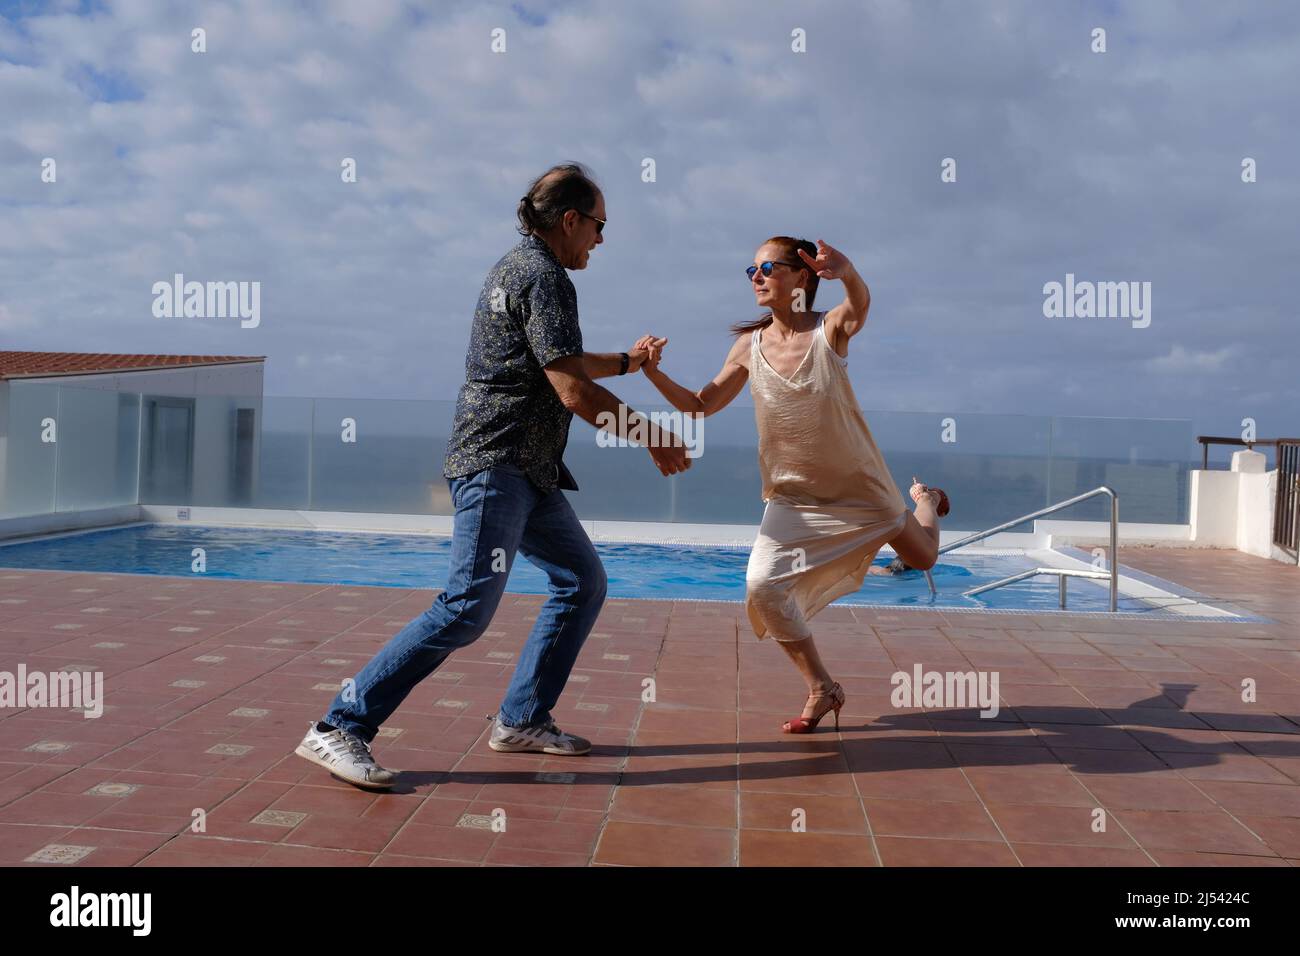 Two people practice dancing, the tango, on a hotel roof by a pool. Stock Photo